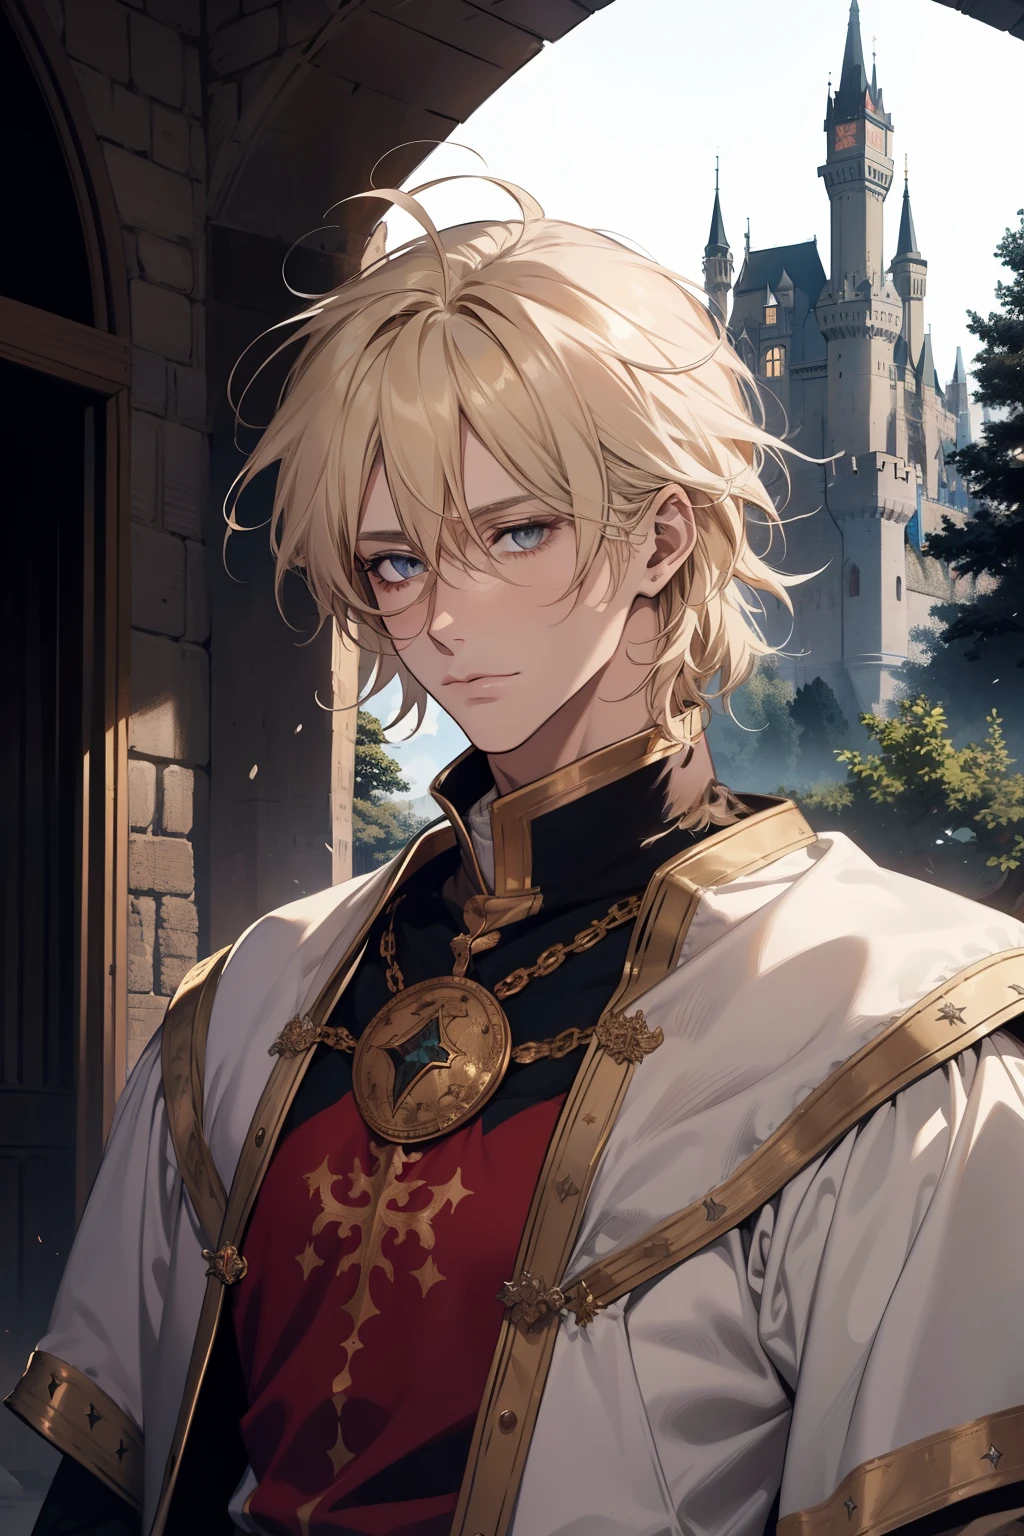 1 Male, AS-Adult, Messy blonde hair and bangs, prince, white  clothes, Handsome, dispassionate, The beautiful, Condescending, slimification, in a castle, Medieval fantasy